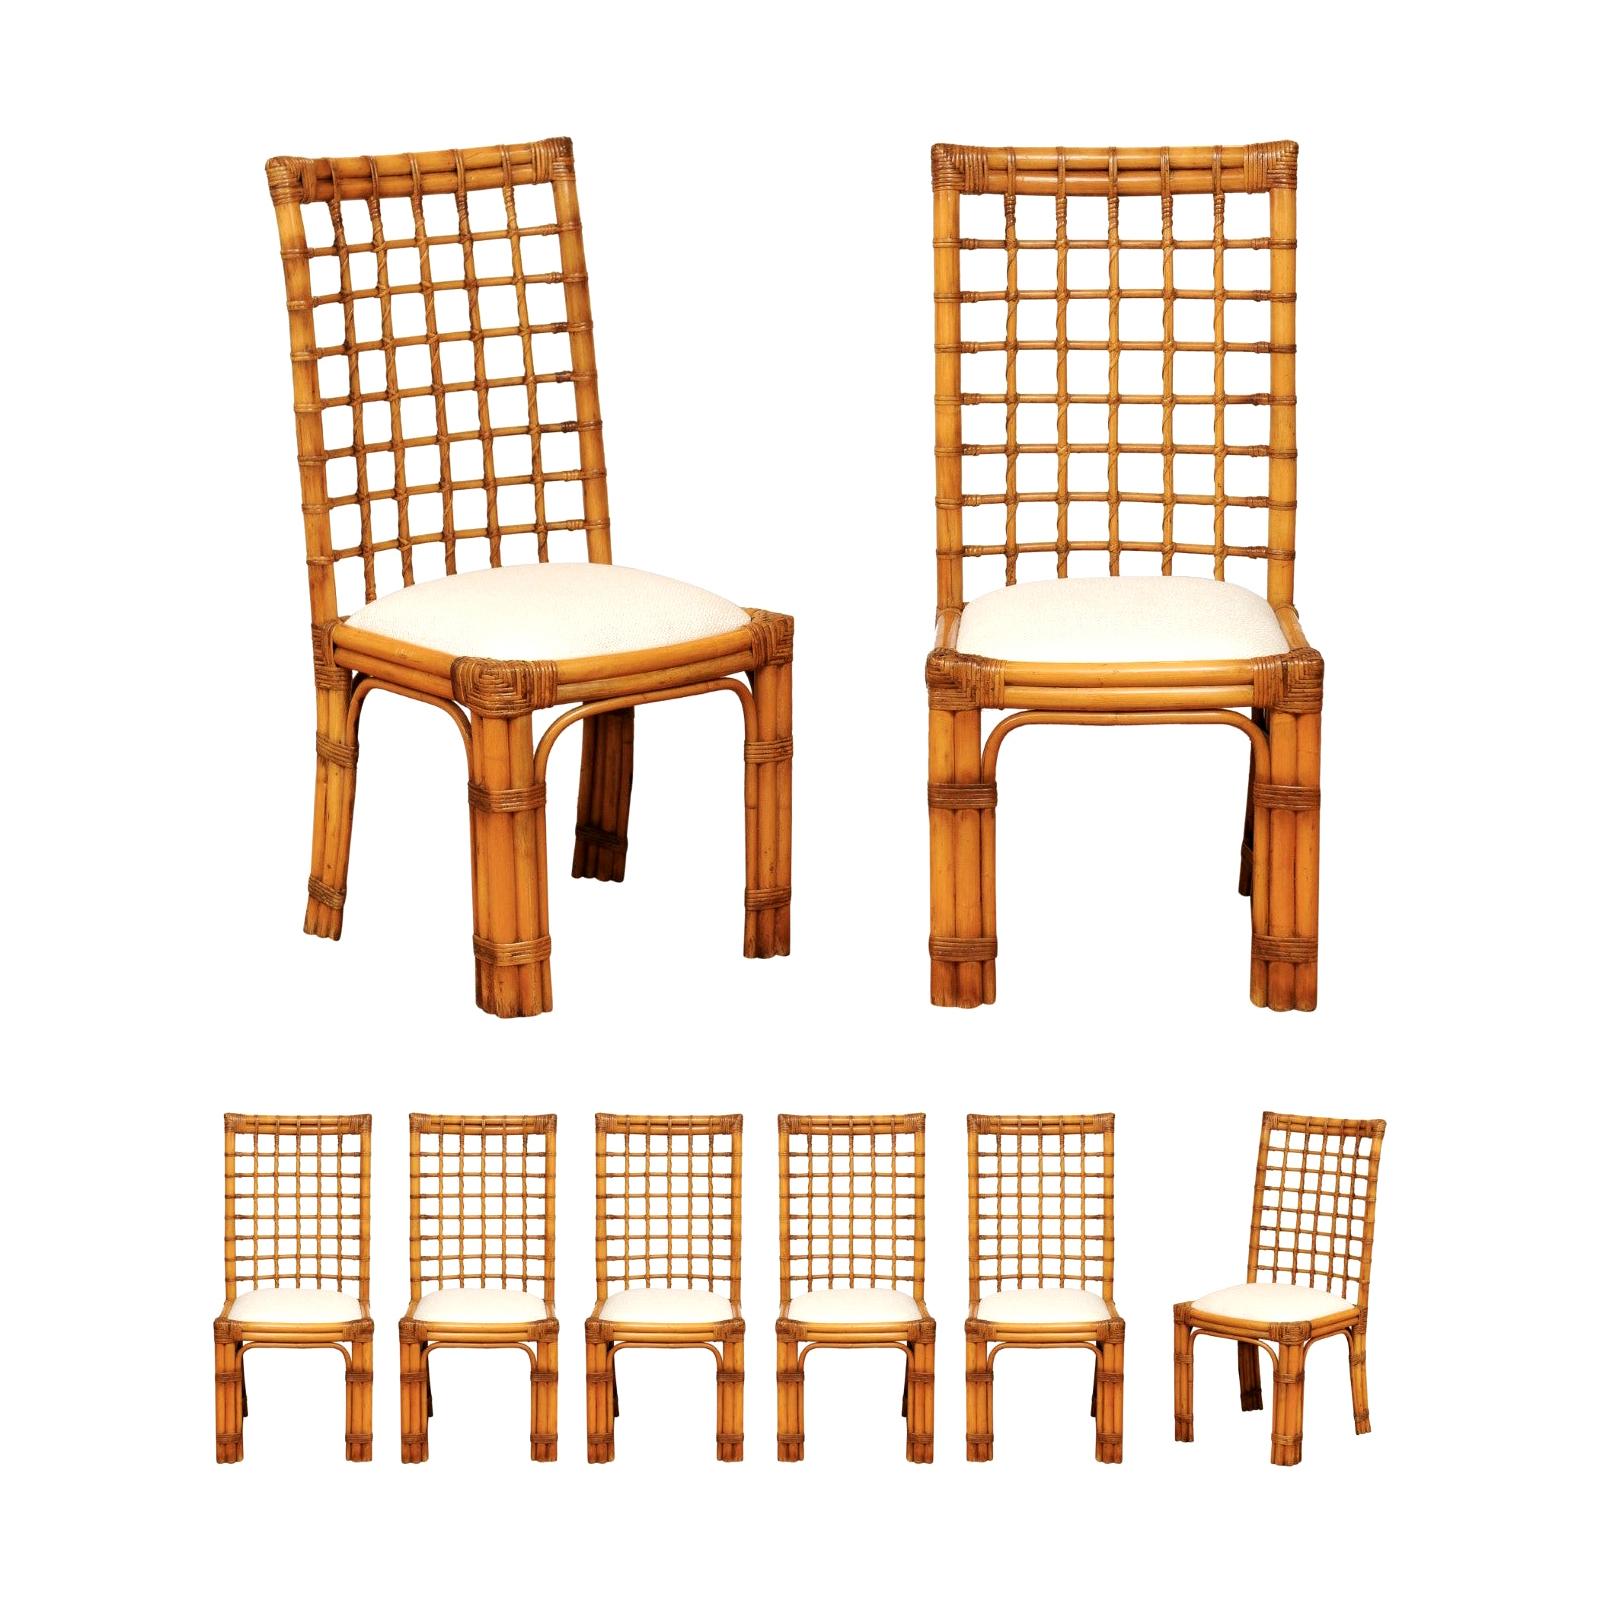 Unique Restored Set of 8 Square Series Dining Chairs by Henry Olko, circa 1979